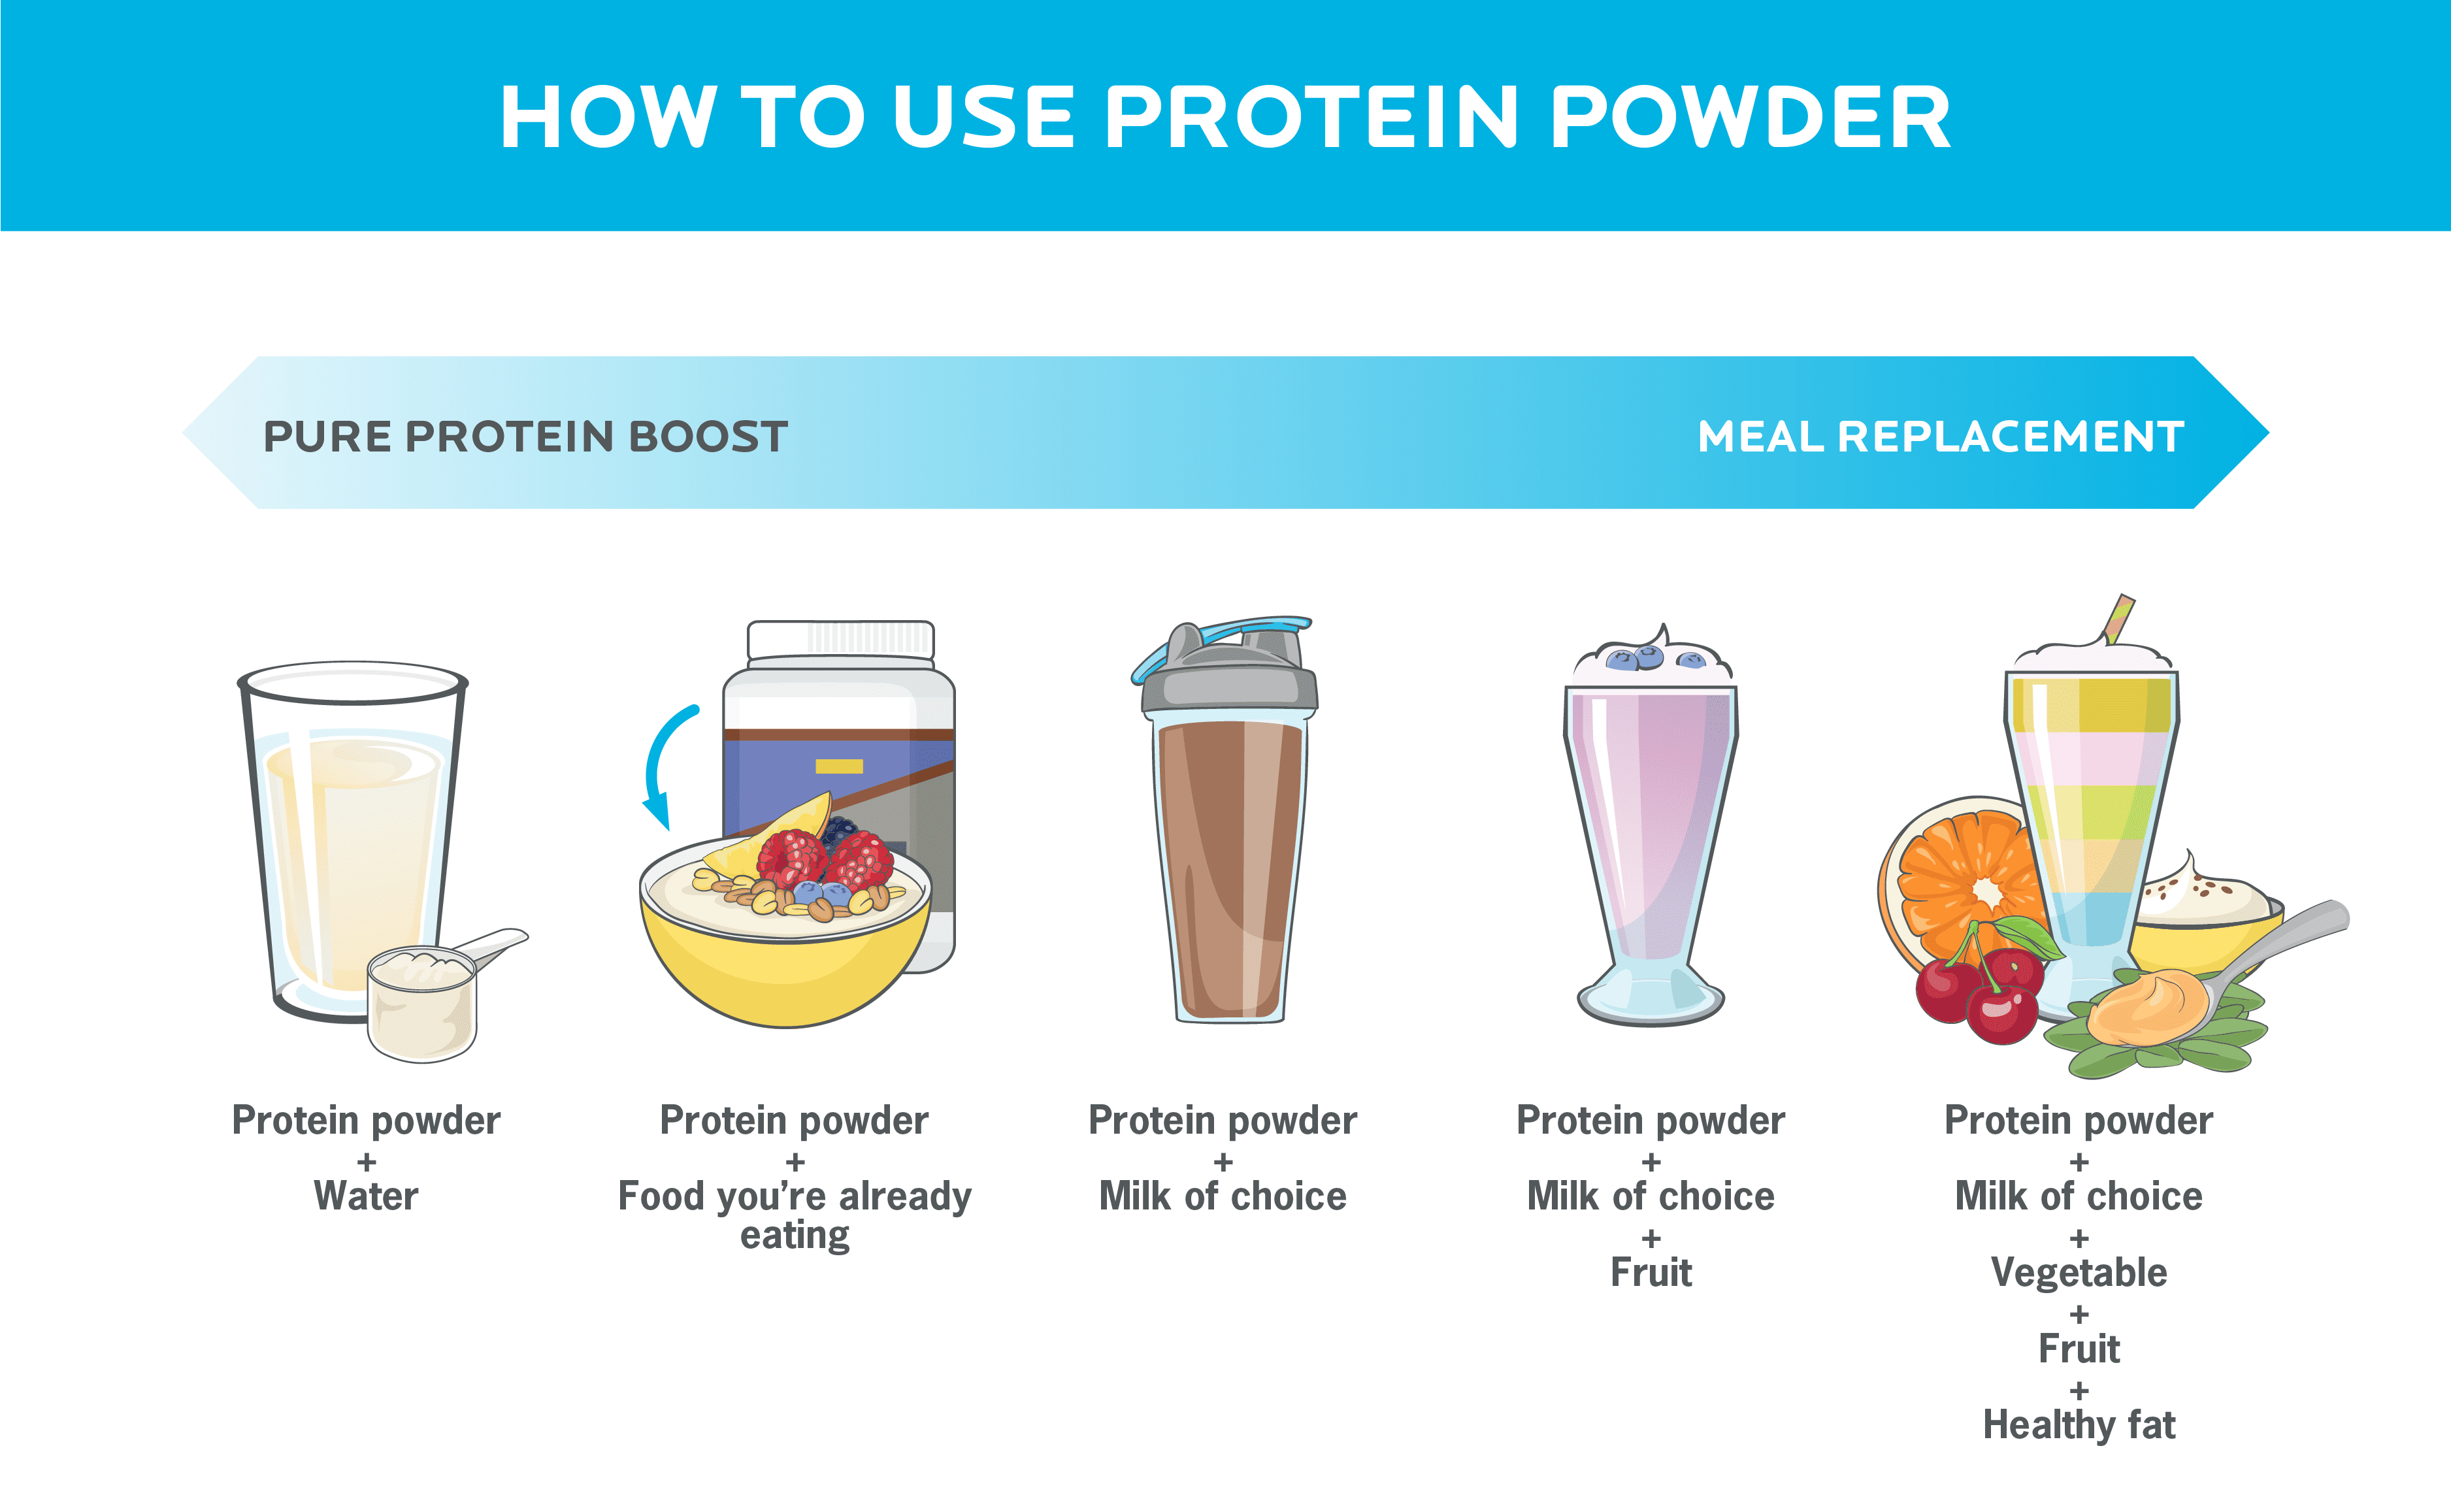 Different ways to use protein powder, from a pure protein boost when mixed with water to a meal replacement smoothie.